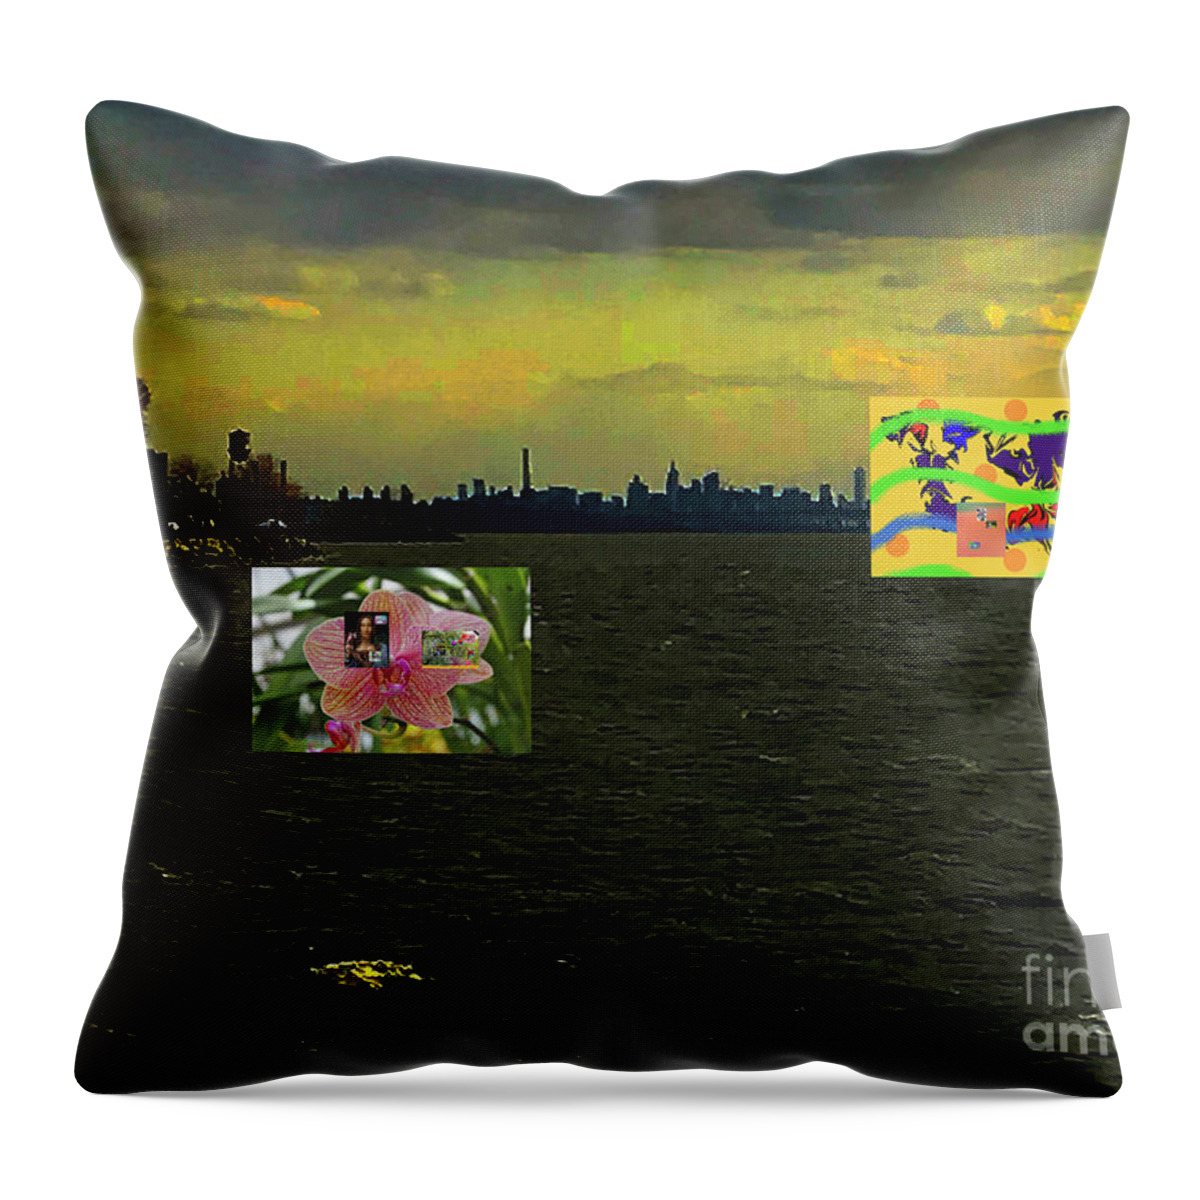 Walter Paul Bebirian: Volord Kingdom Art Collection Grand Gallery Throw Pillow featuring the digital art 2-25-2019f by Walter Paul Bebirian